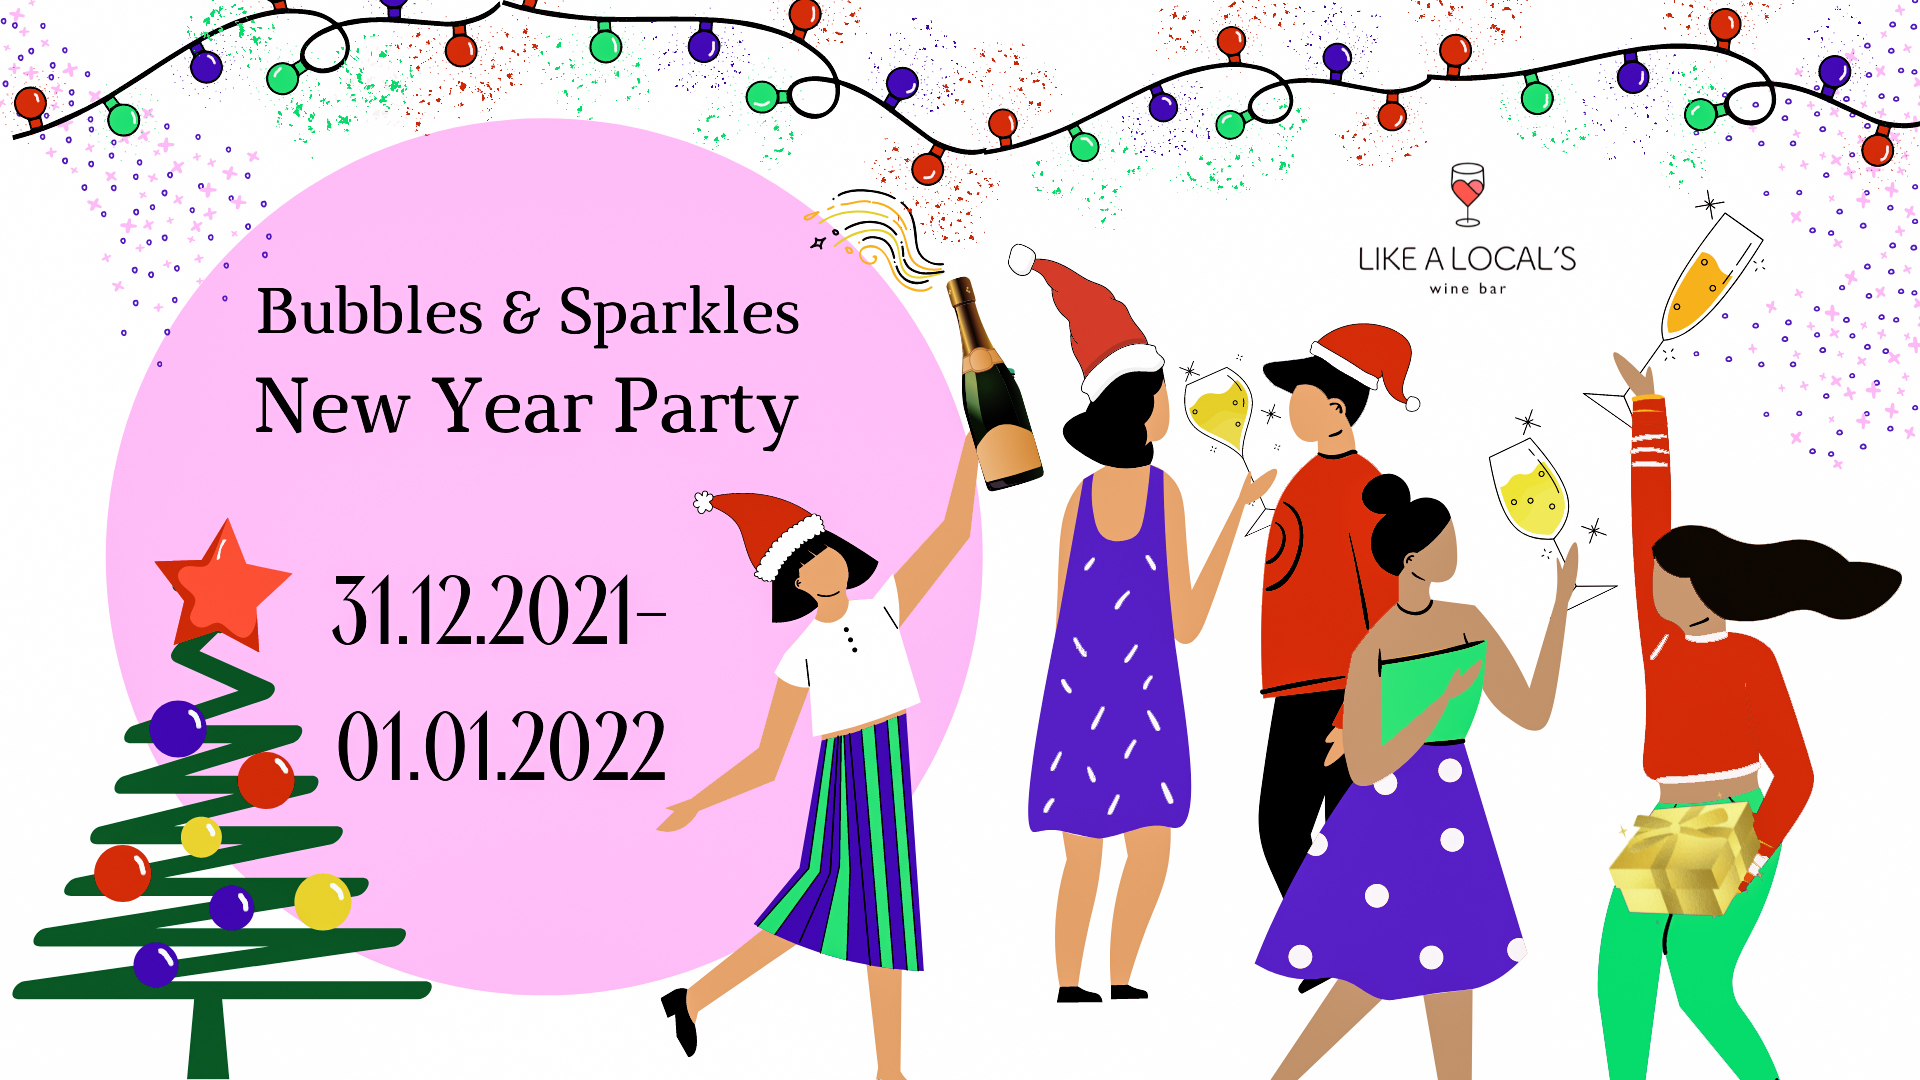 Bubbles & Sparkles New Year Party